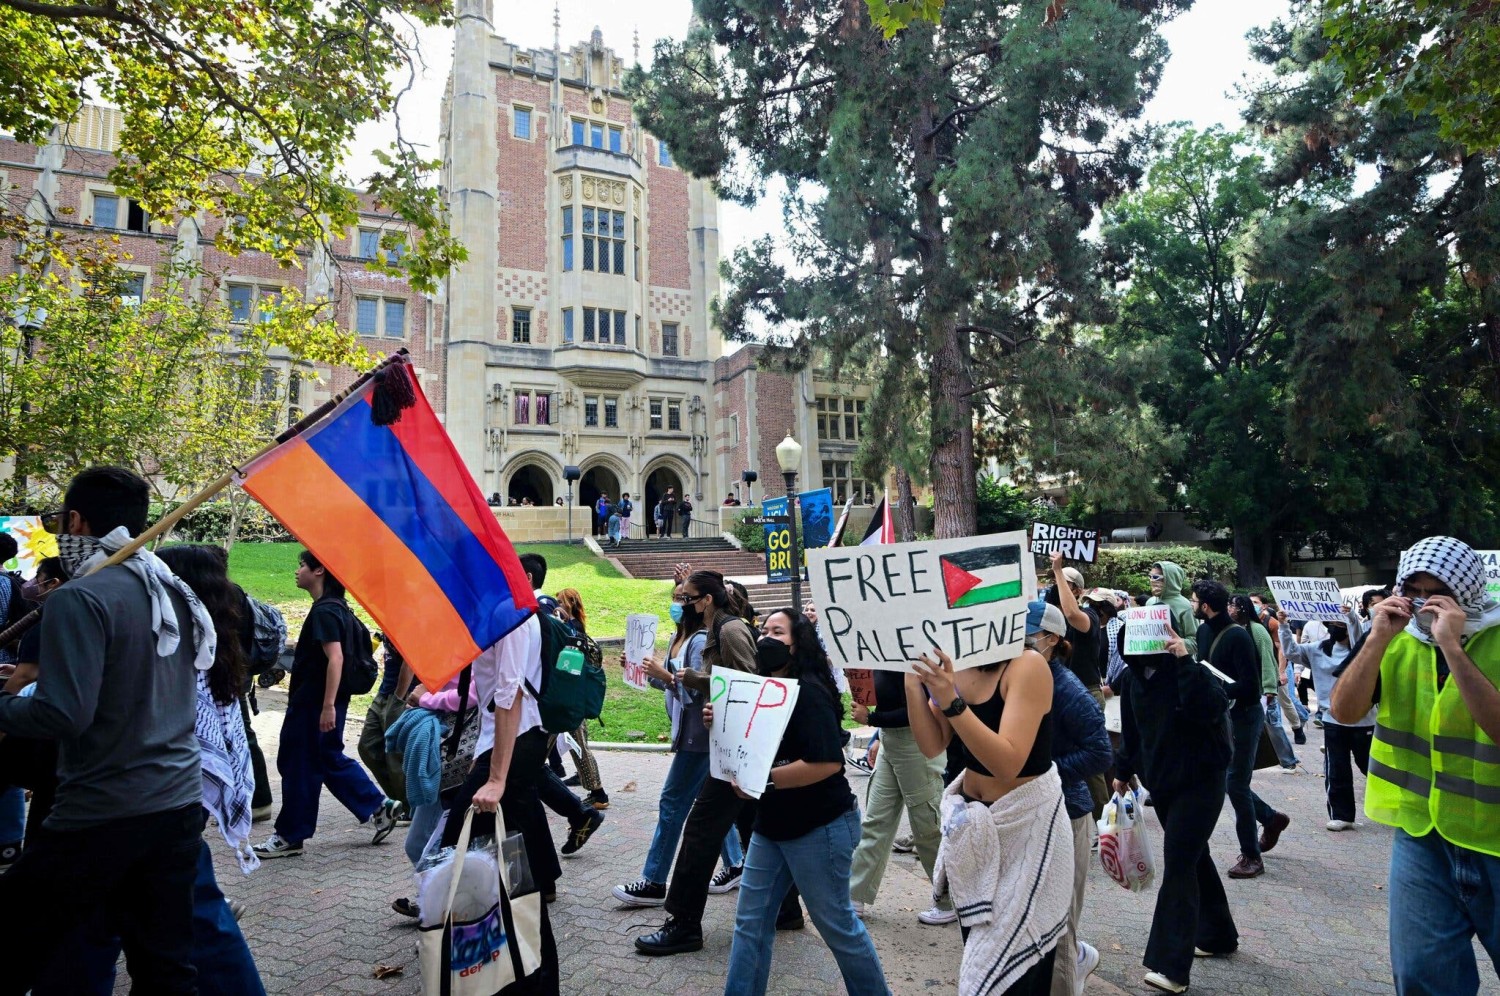 A pro-Palestinian demonstration last week at the University of California, Los Angeles. Republicans have called for campus crackdowns on such protests. Credit...Frederic J. Brown/Agence France-Presse — Getty Images